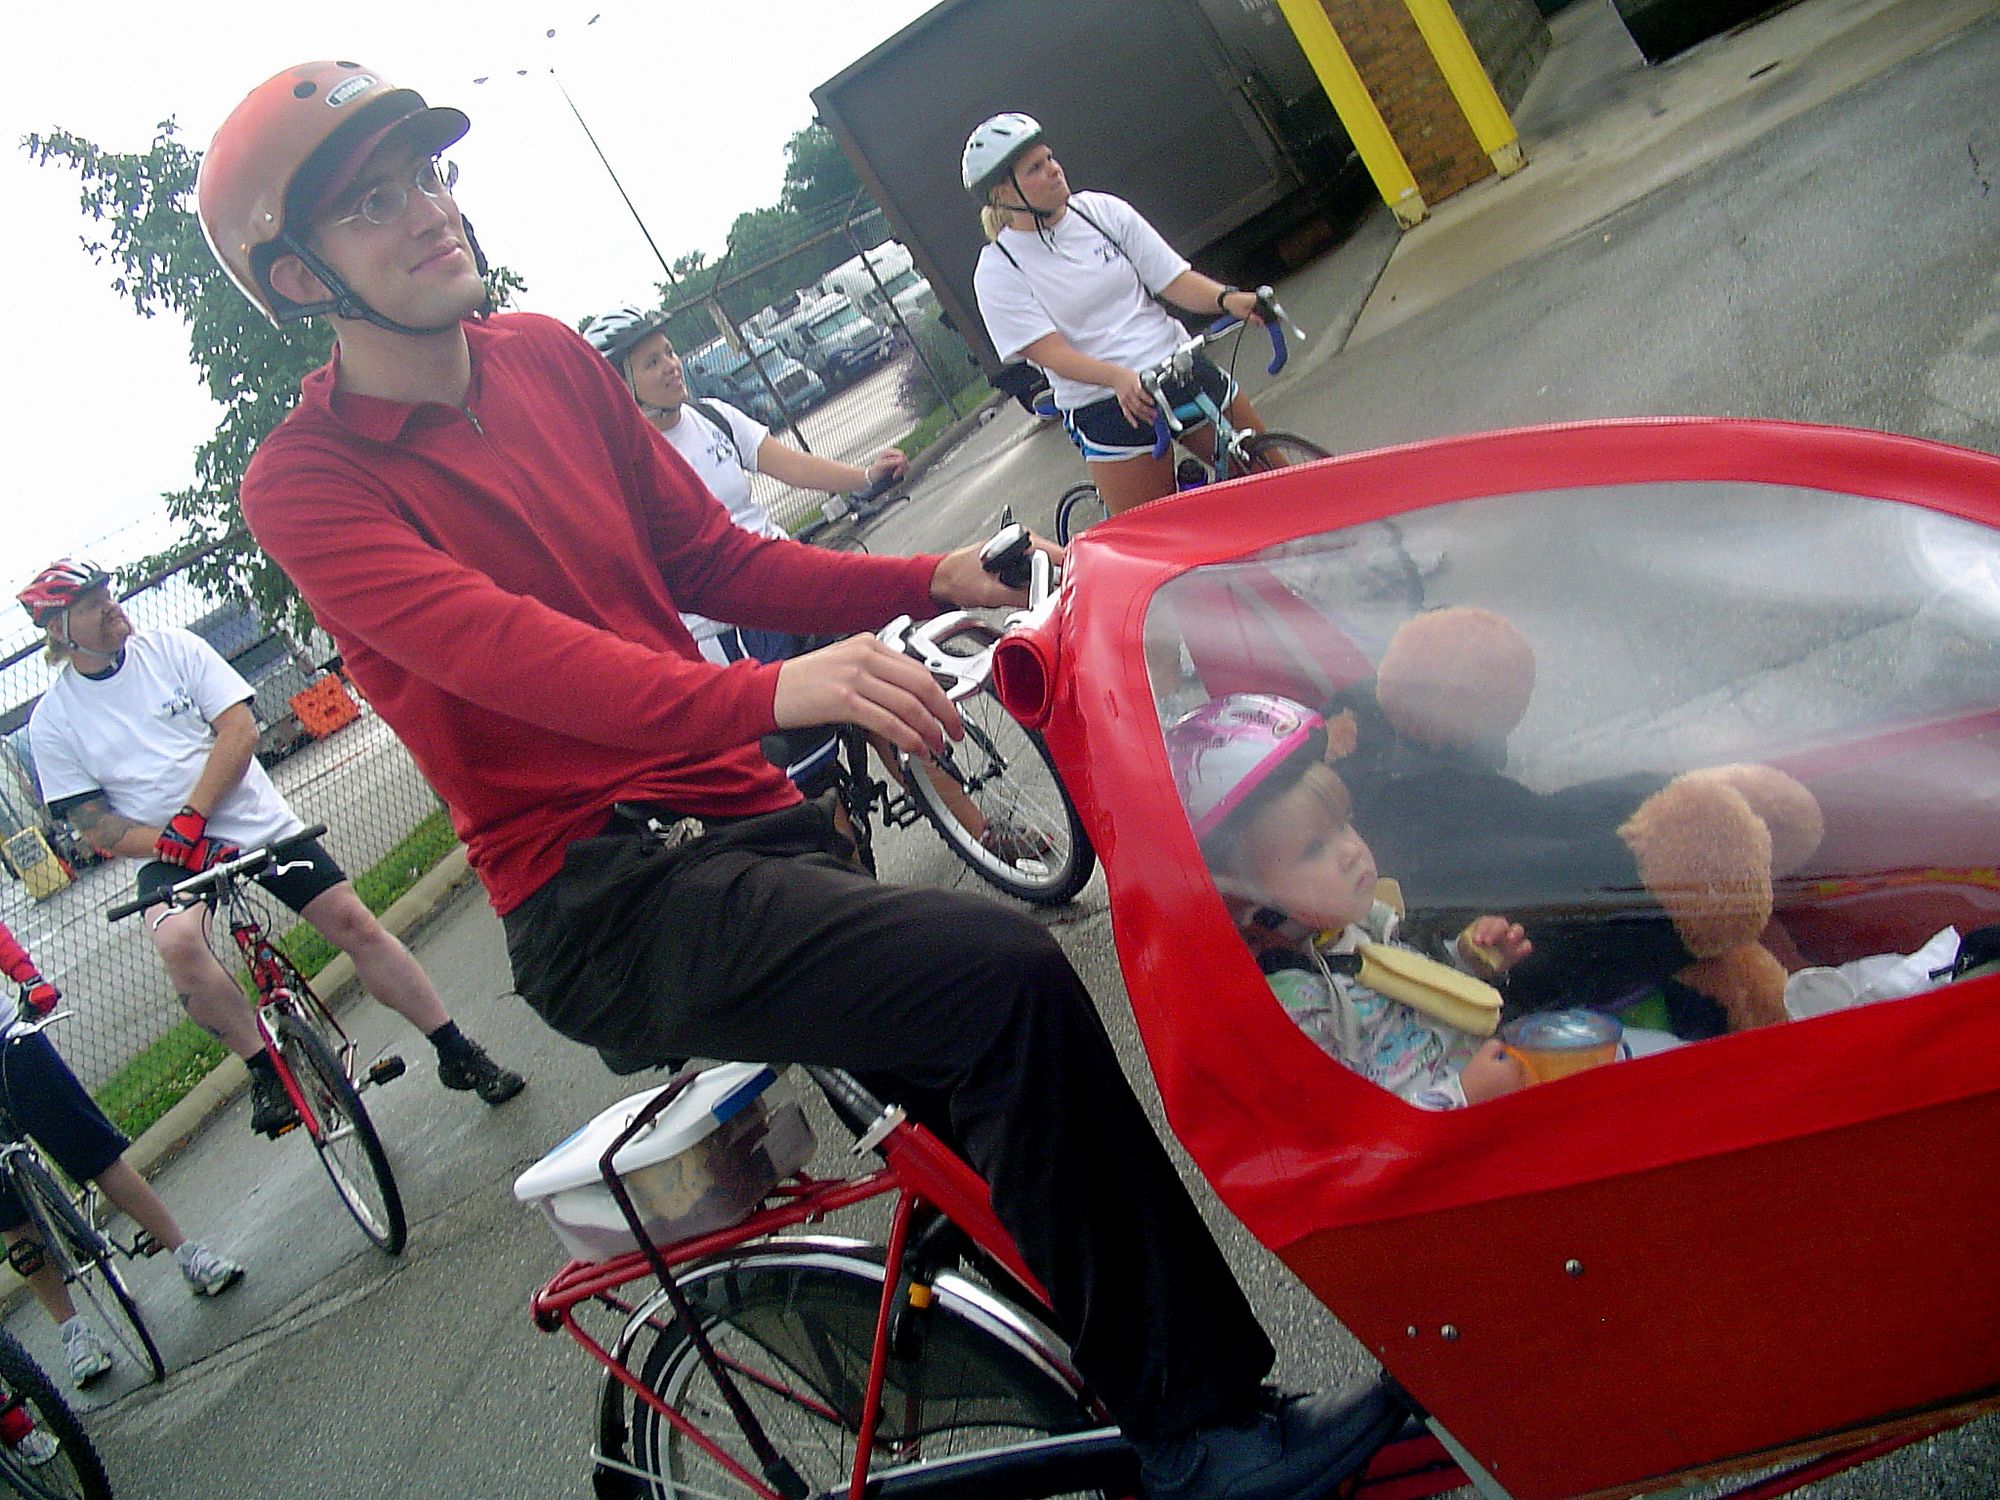 bakfiets with Therese and Sleep Dog at the Reid Ride. Photo by Sean Yates